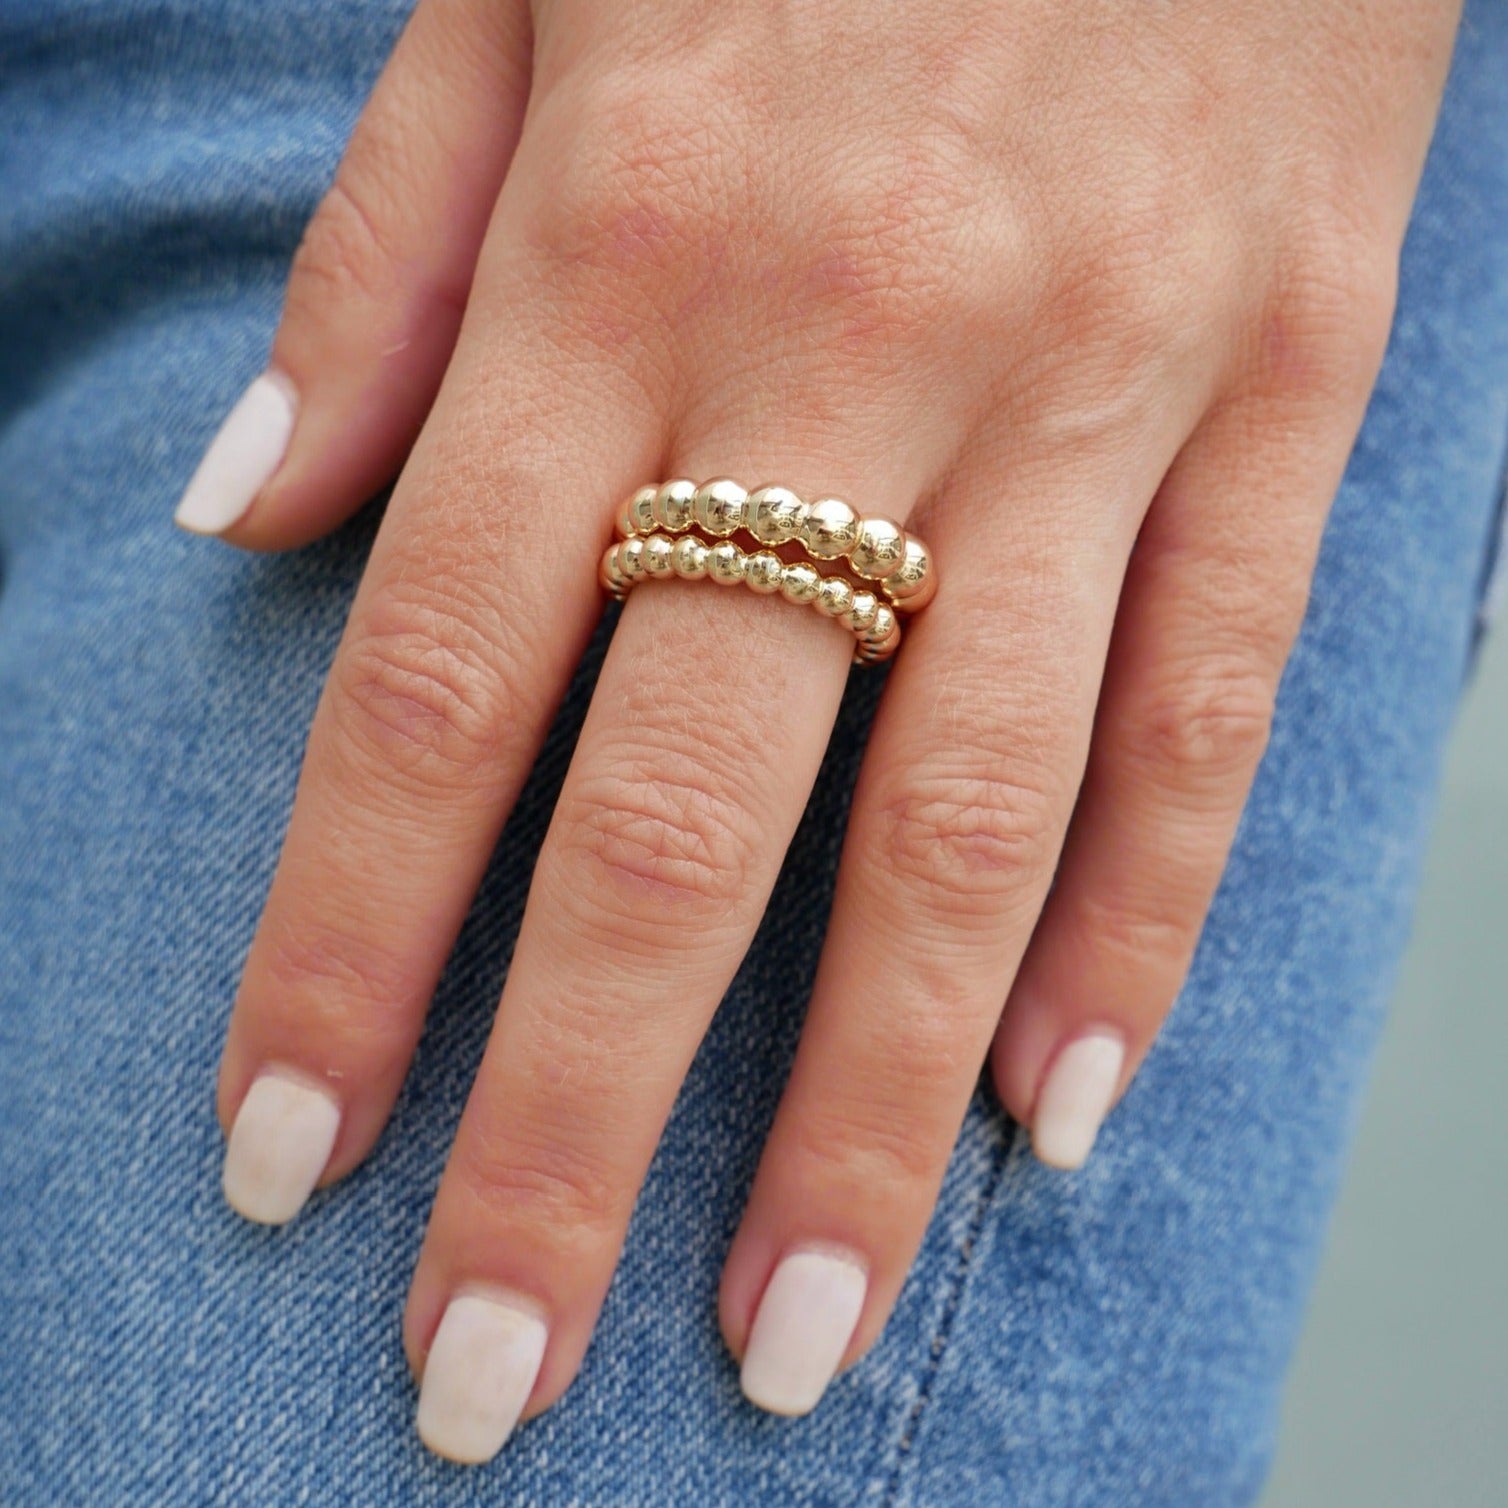 The Chic Stacker Gift Set Rings in 14k Yellow Gold Styled on Finger